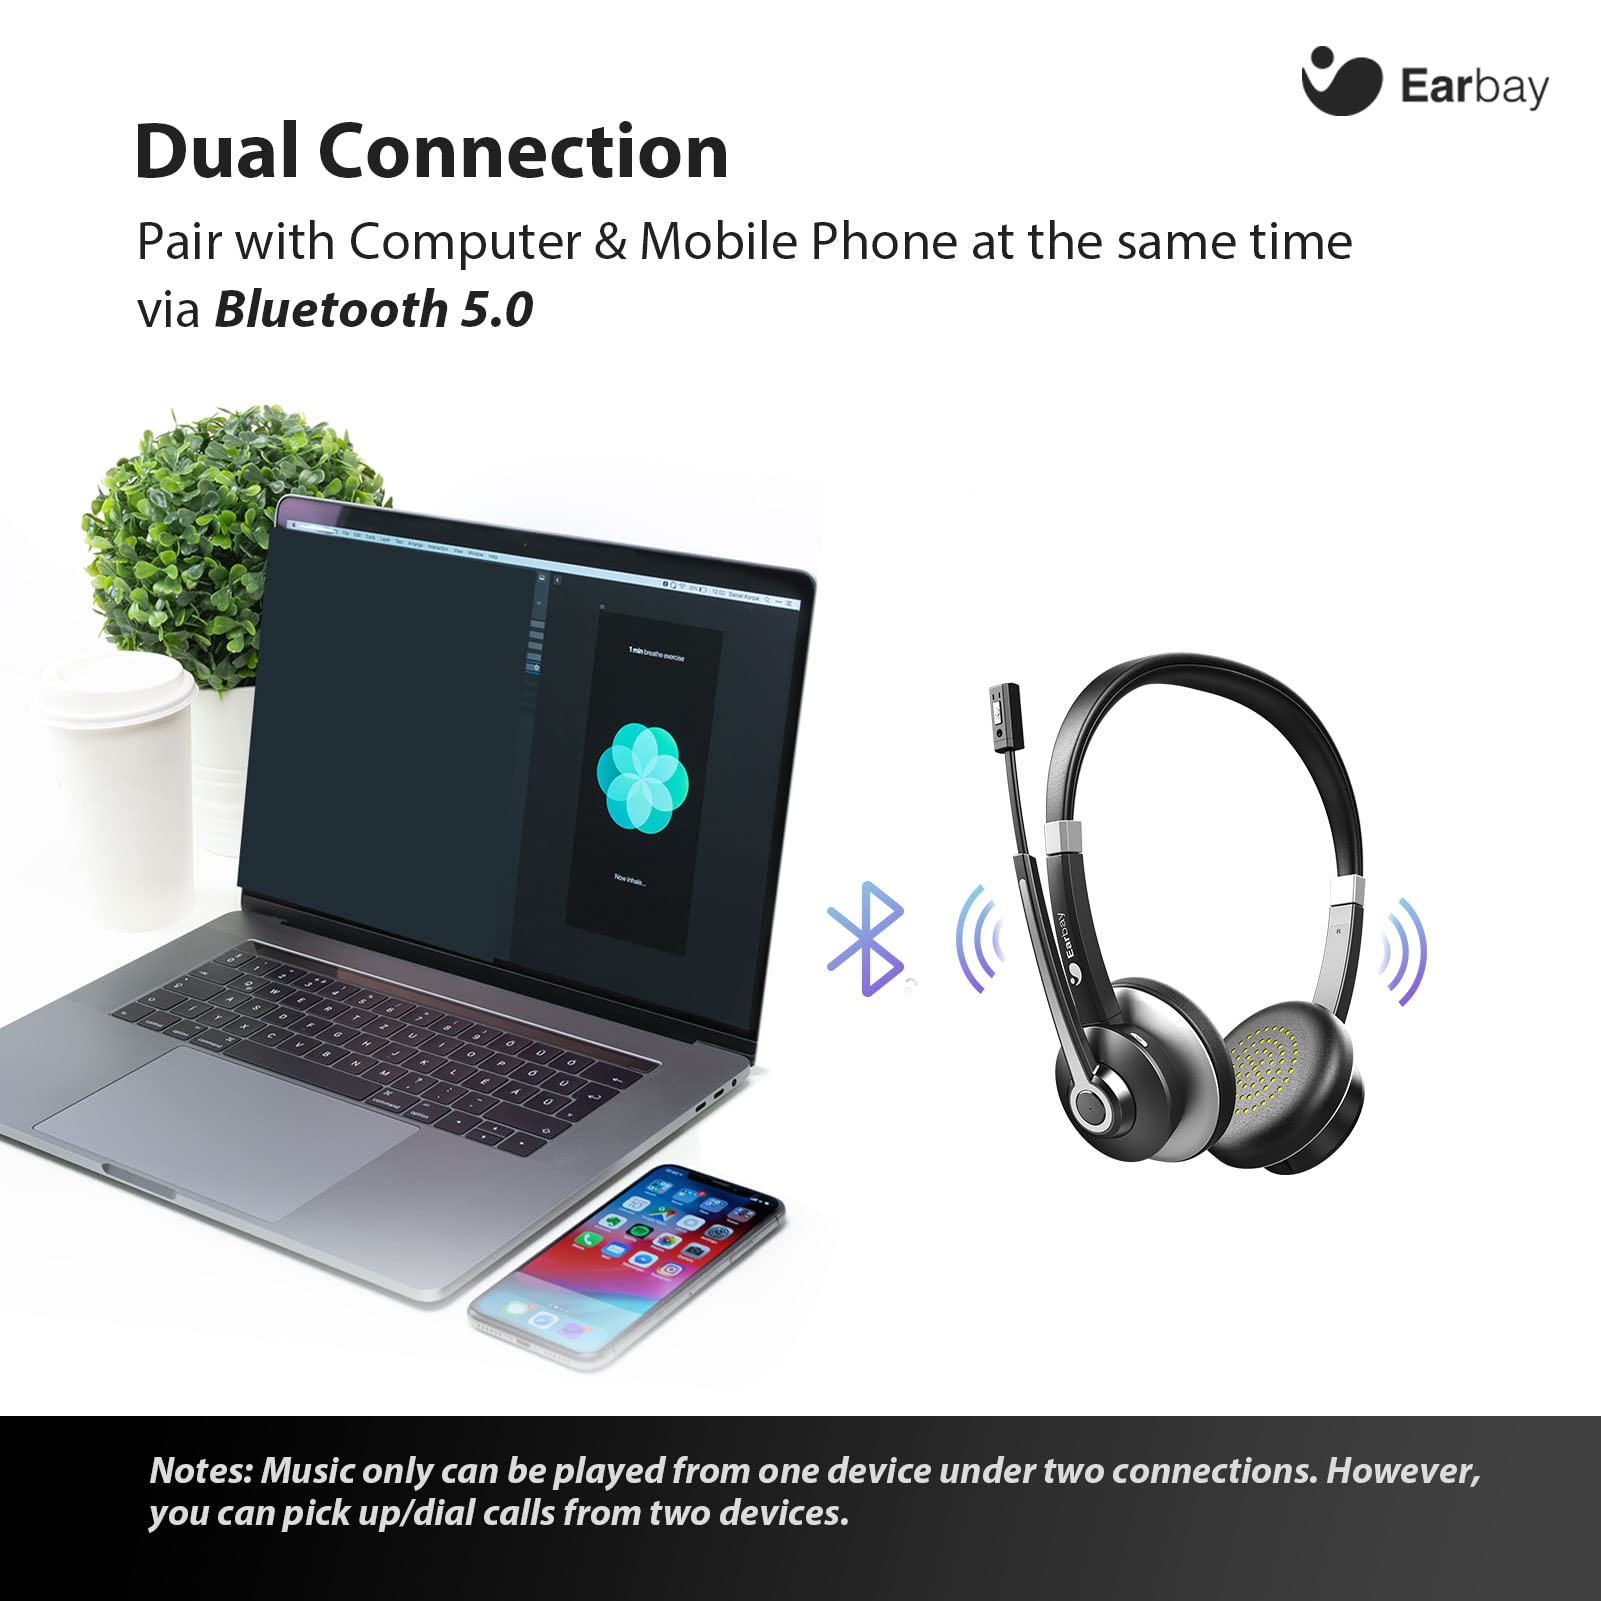 Earbay Bluetooth Headset with Microphone BT688JL